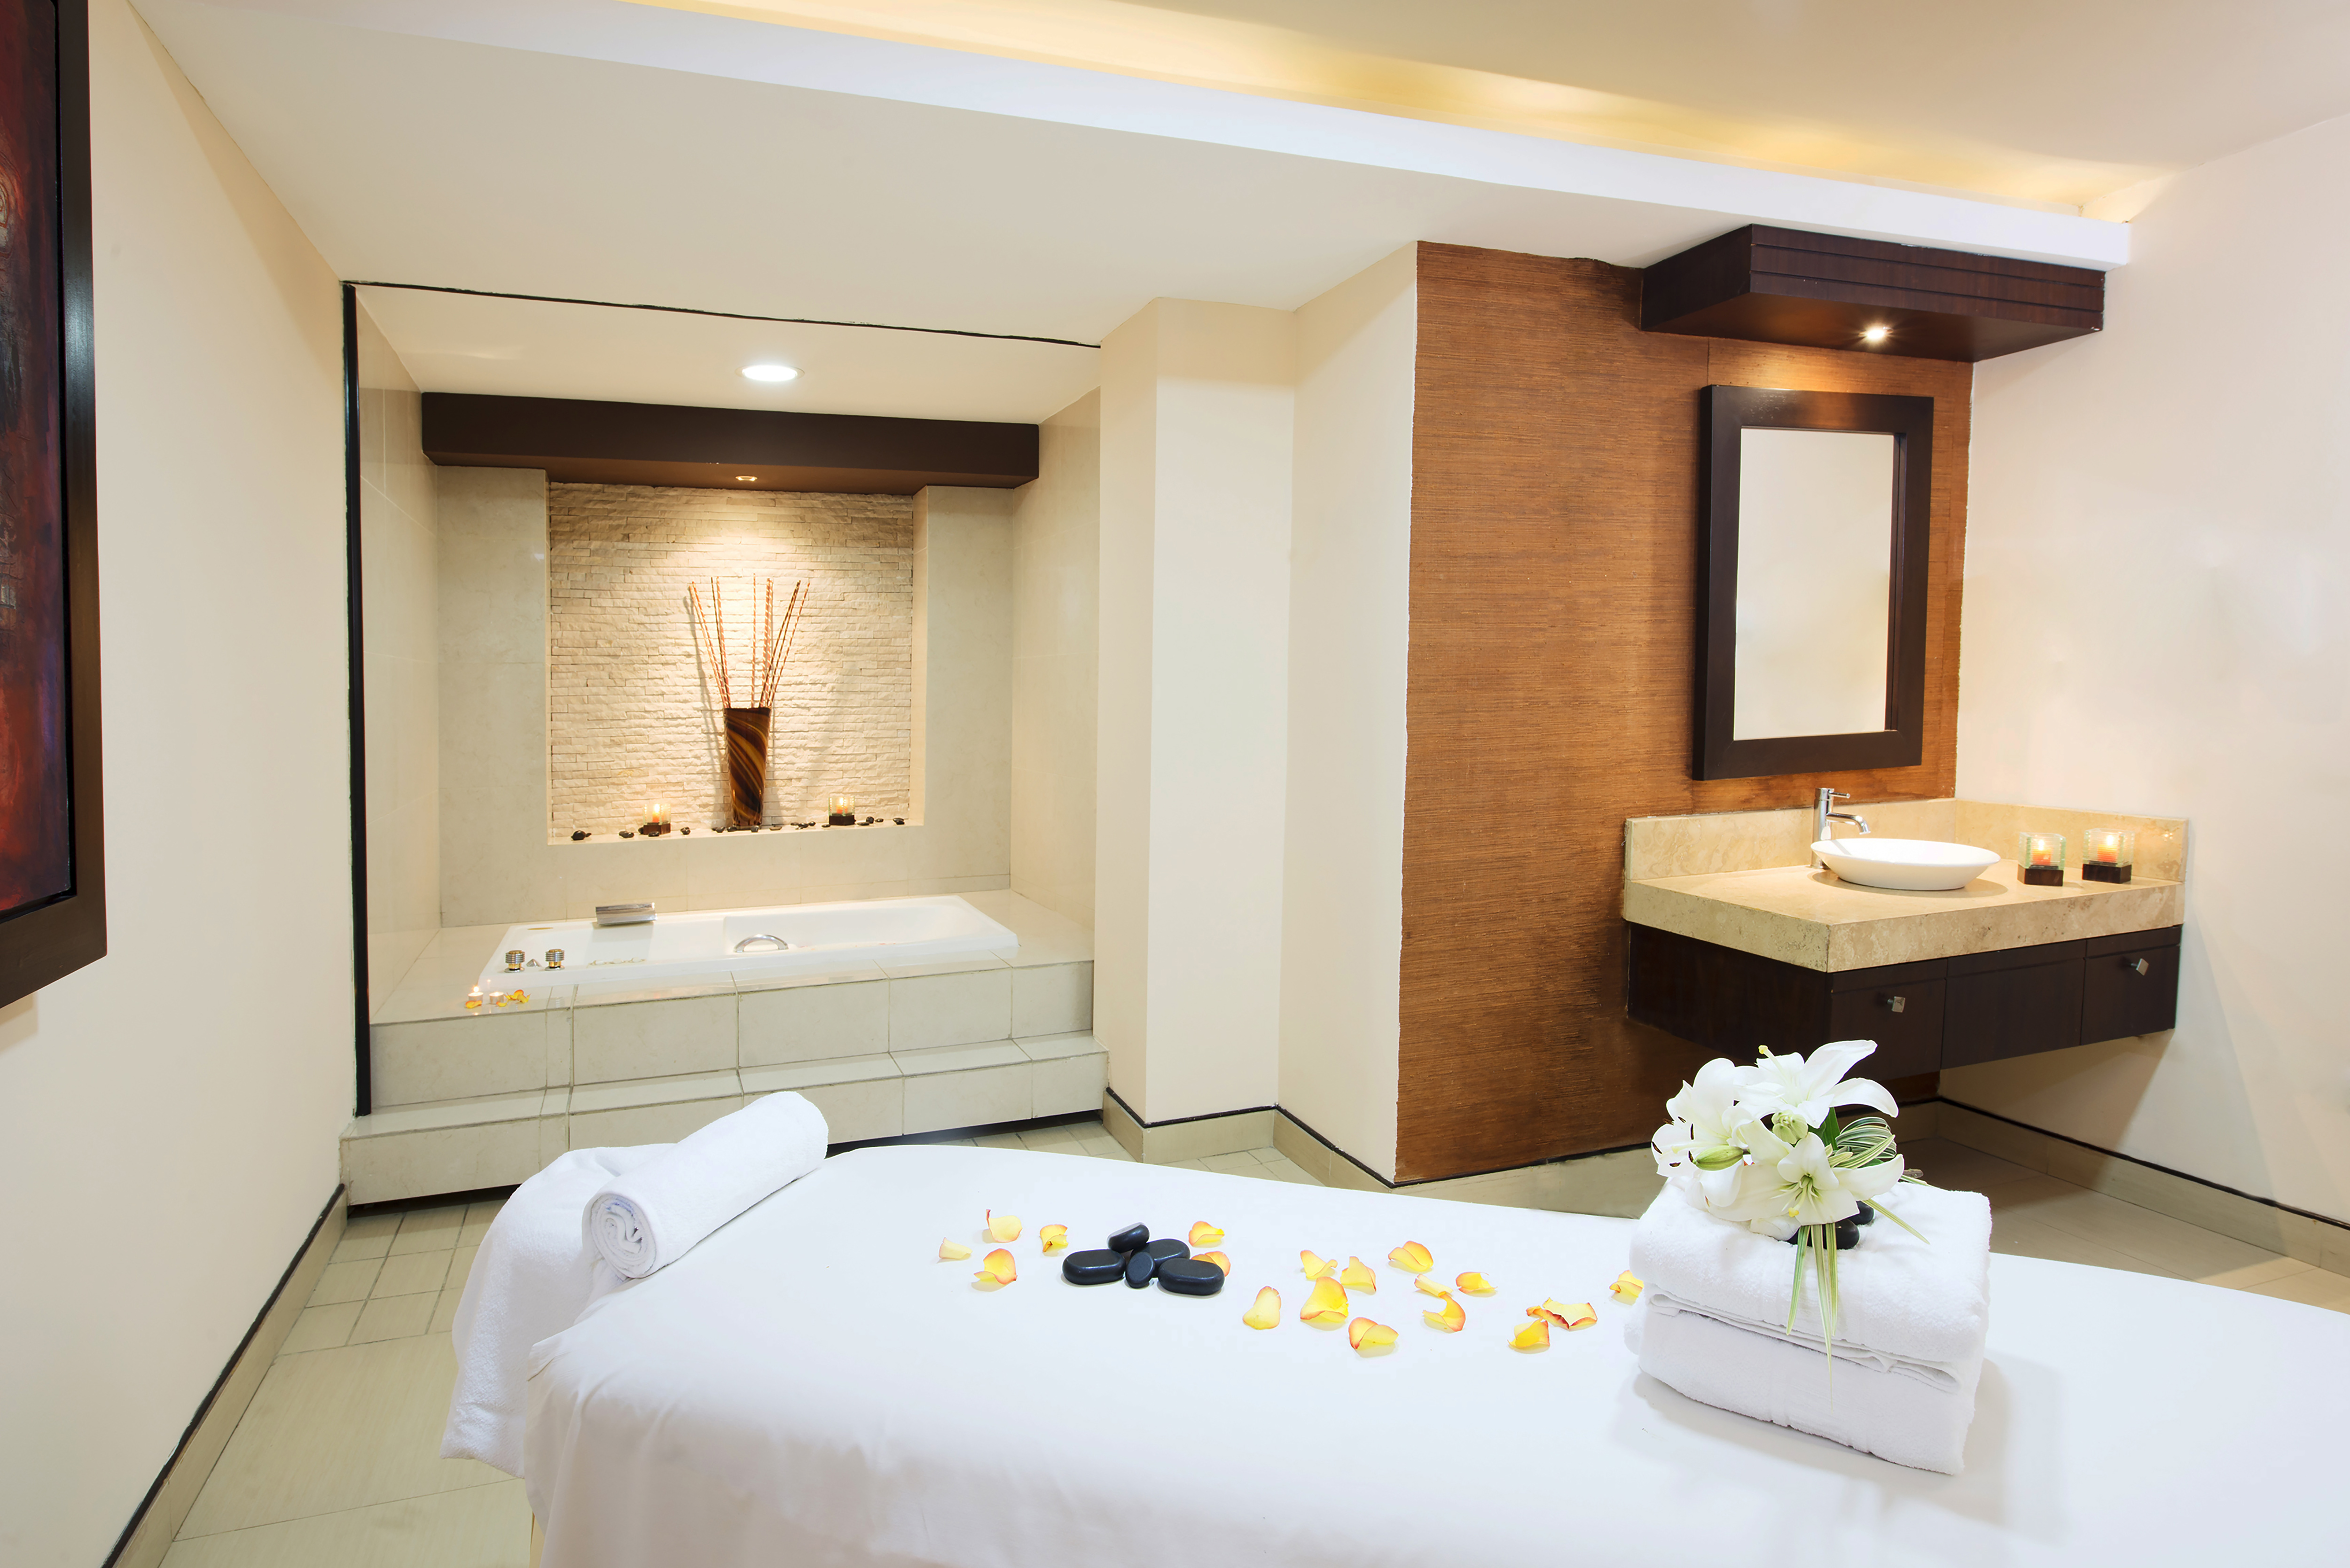 Spa Treatment Room with treatment bed